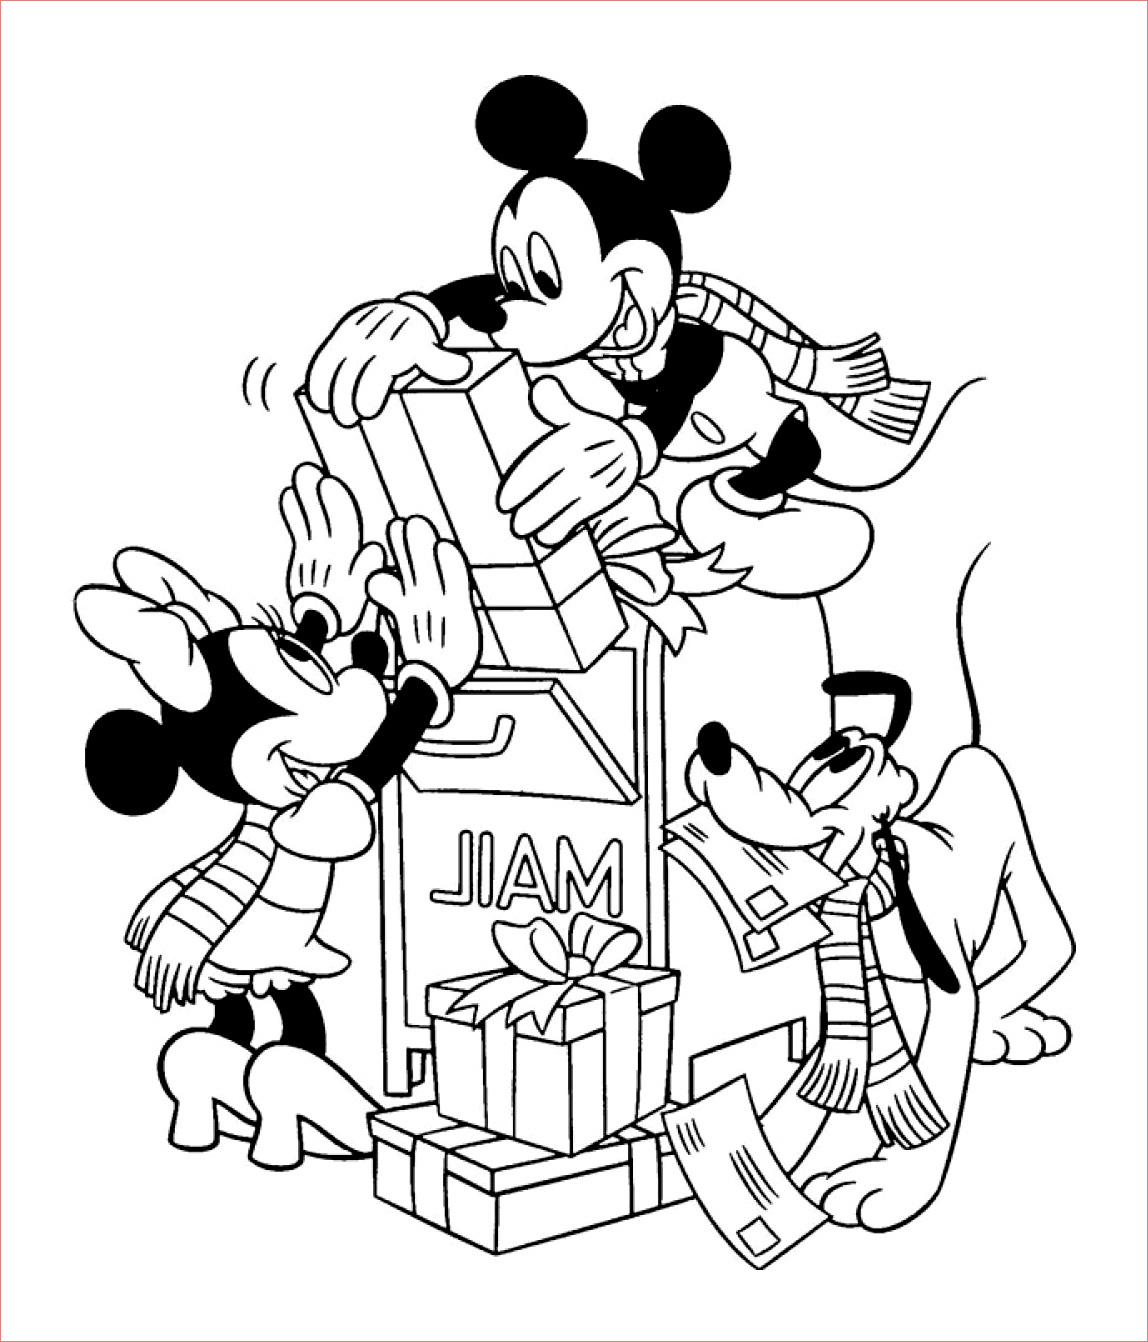 image=mickey and his friends Coloring for kids mickey and his friends 1